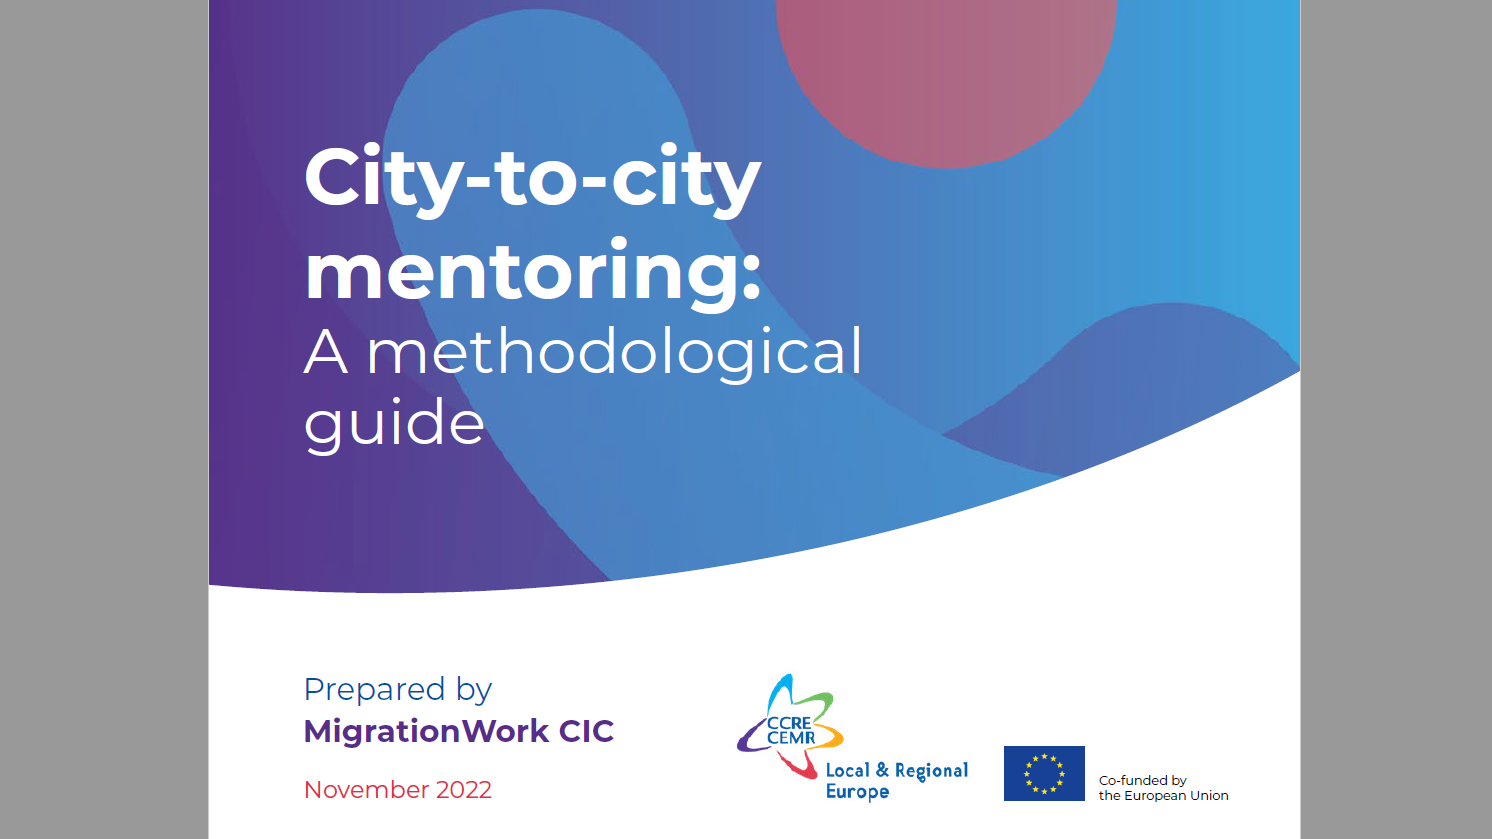 City-to-city mentoring - A methodological guide 